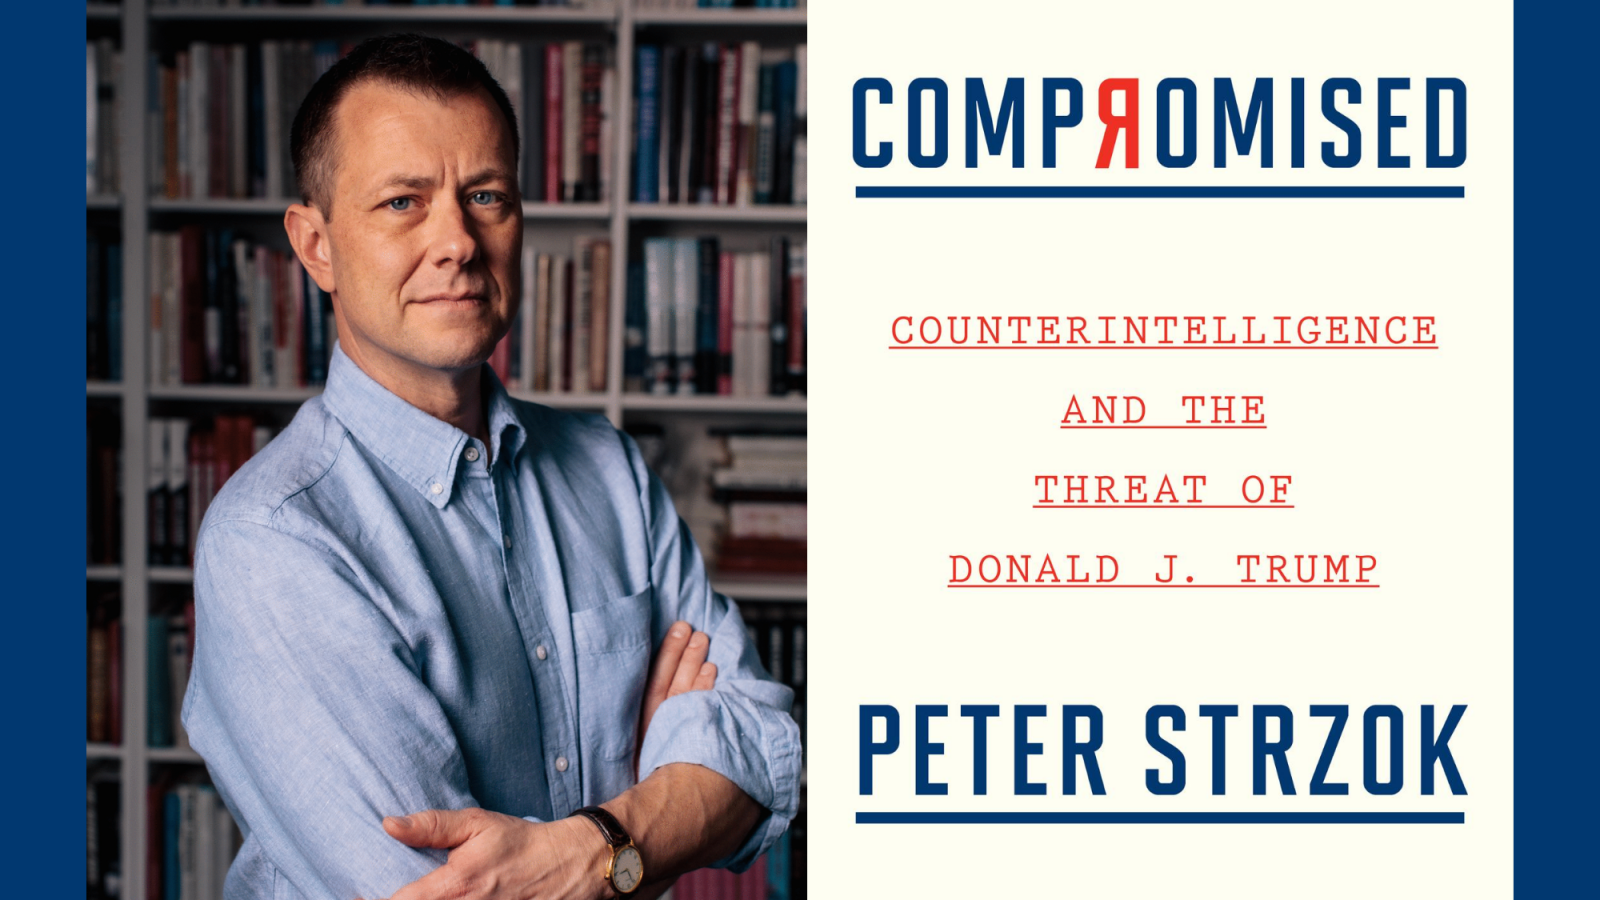 Peter Strzok standing in front of a bookshelf with the cover of his book, Compromised, next to him